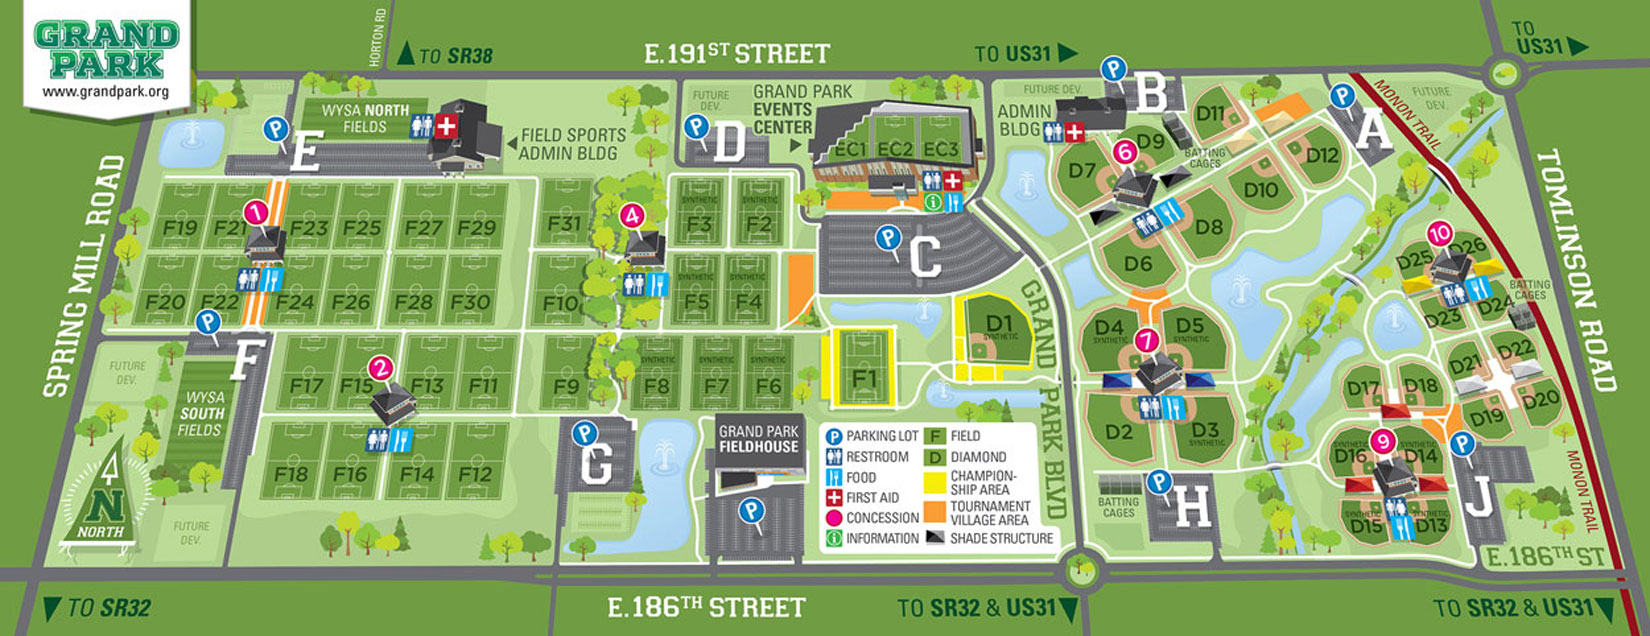 Grand Park Lllustrated Map Wilkinson Brothers Graphic Design And